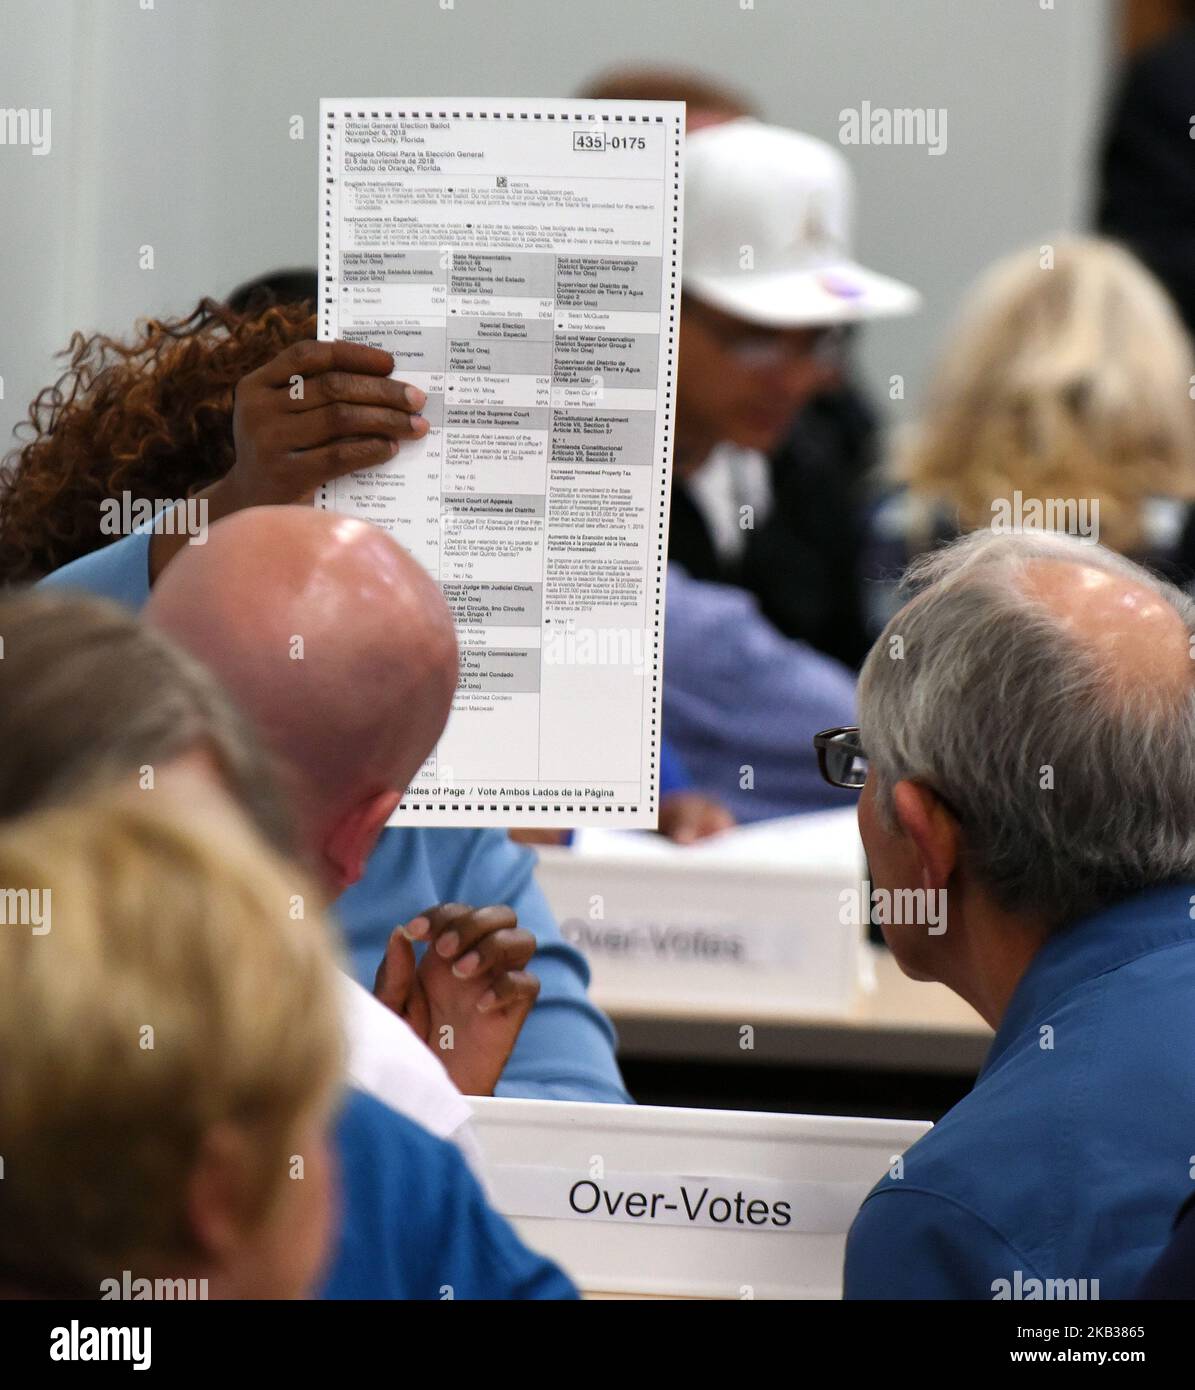 November 16, 2018 - Orlando, Florida, United States - Election workers perform a manual recount of ballots on November 16, 2018 at the Orange County Supervisor of Elections Office in Orlando, Florida. On November 15, 2018, a statewide manual recount of votes was ordered in the hotly contested Senate race between Republican Governor Rick Scott and Democrat Bill Nelson, as well as the close race for Florida Agriculture Commissioner. (Photo by Paul Hennessy/NurPhoto) Stock Photo